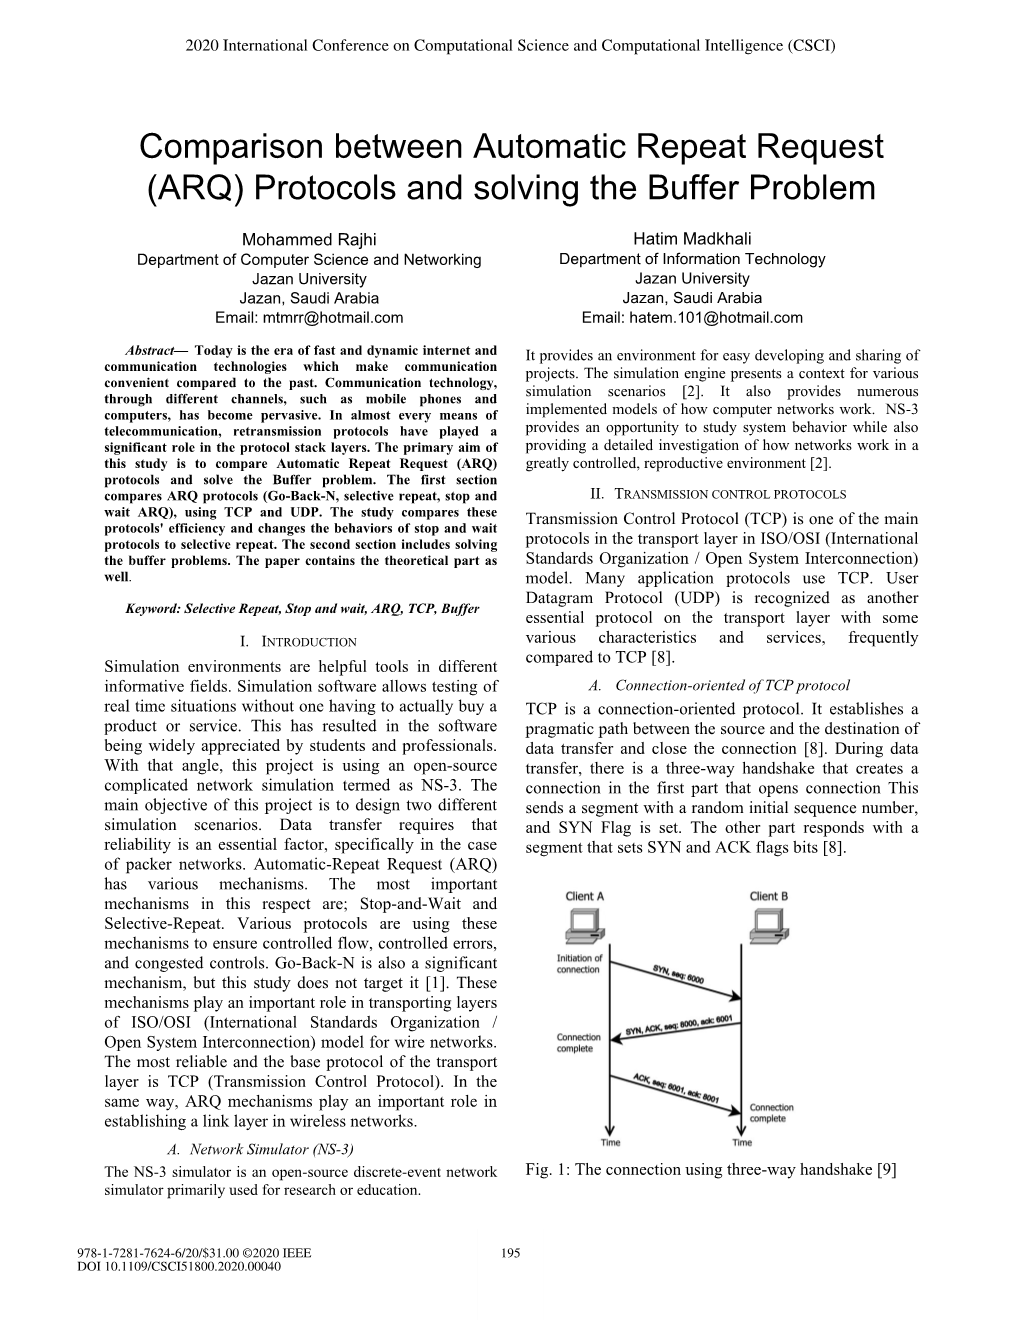 Comparison Between Automatic Repeat Request (ARQ) Protocols and Solving the Buffer Problem